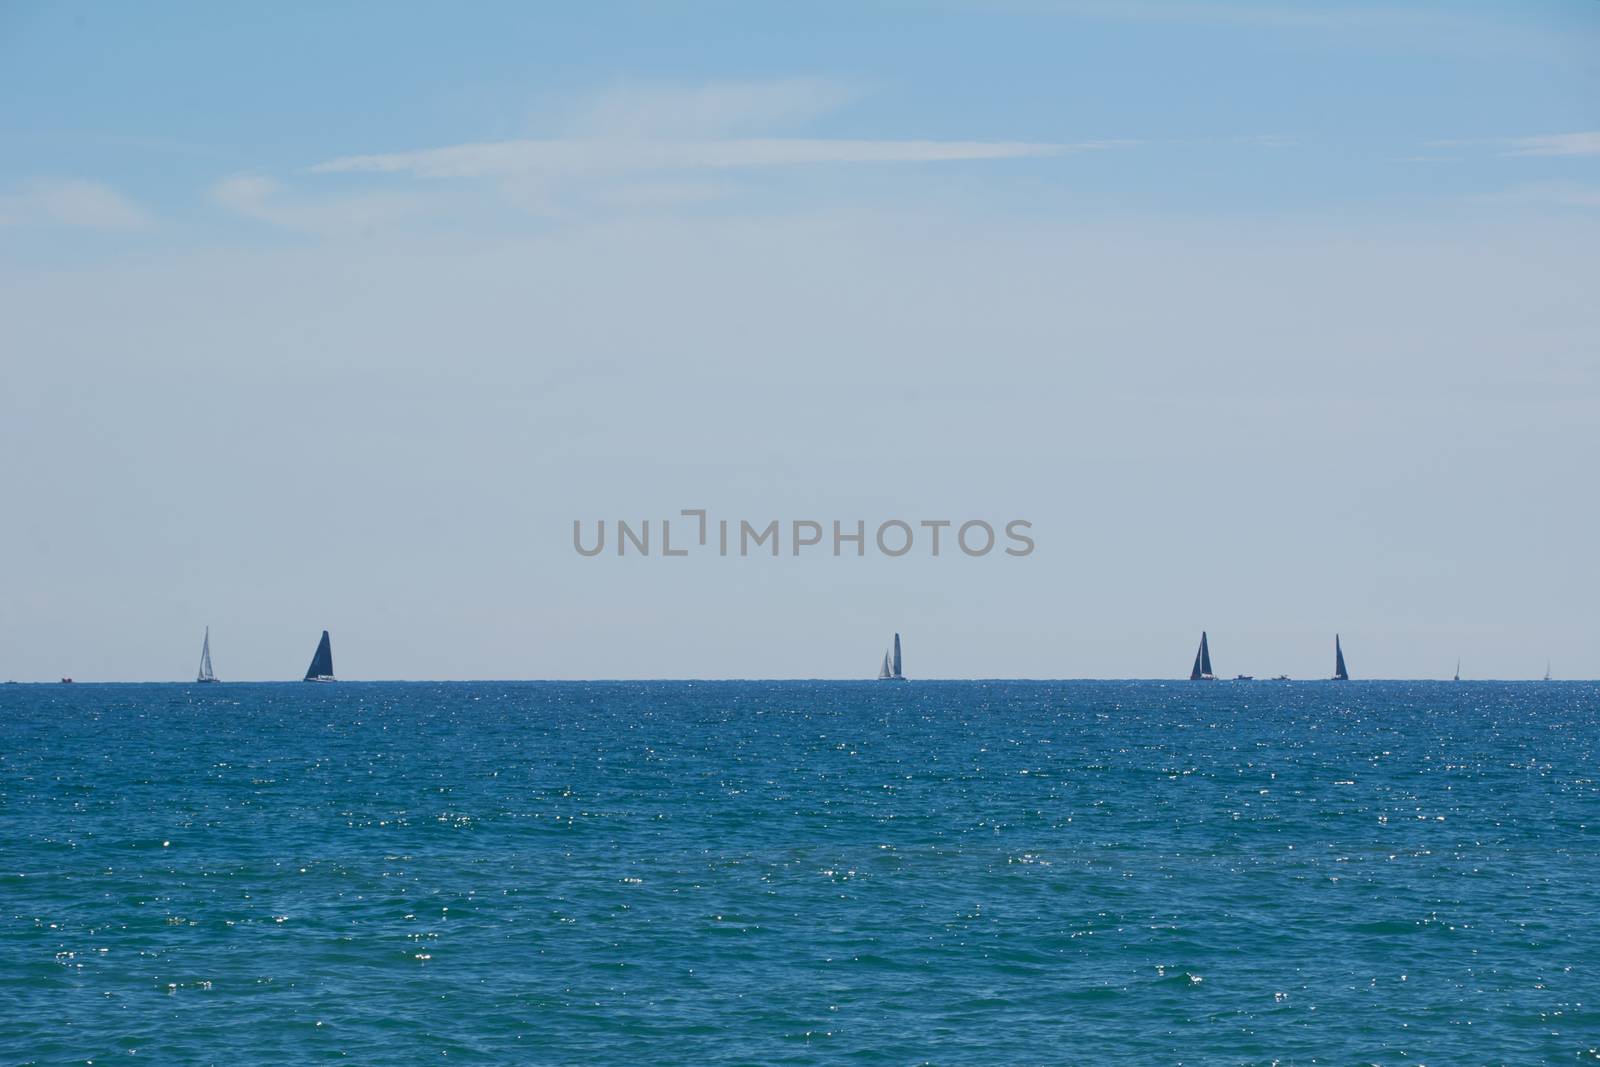 Super sunny day to sail in the Mediterranean by raul_ruiz